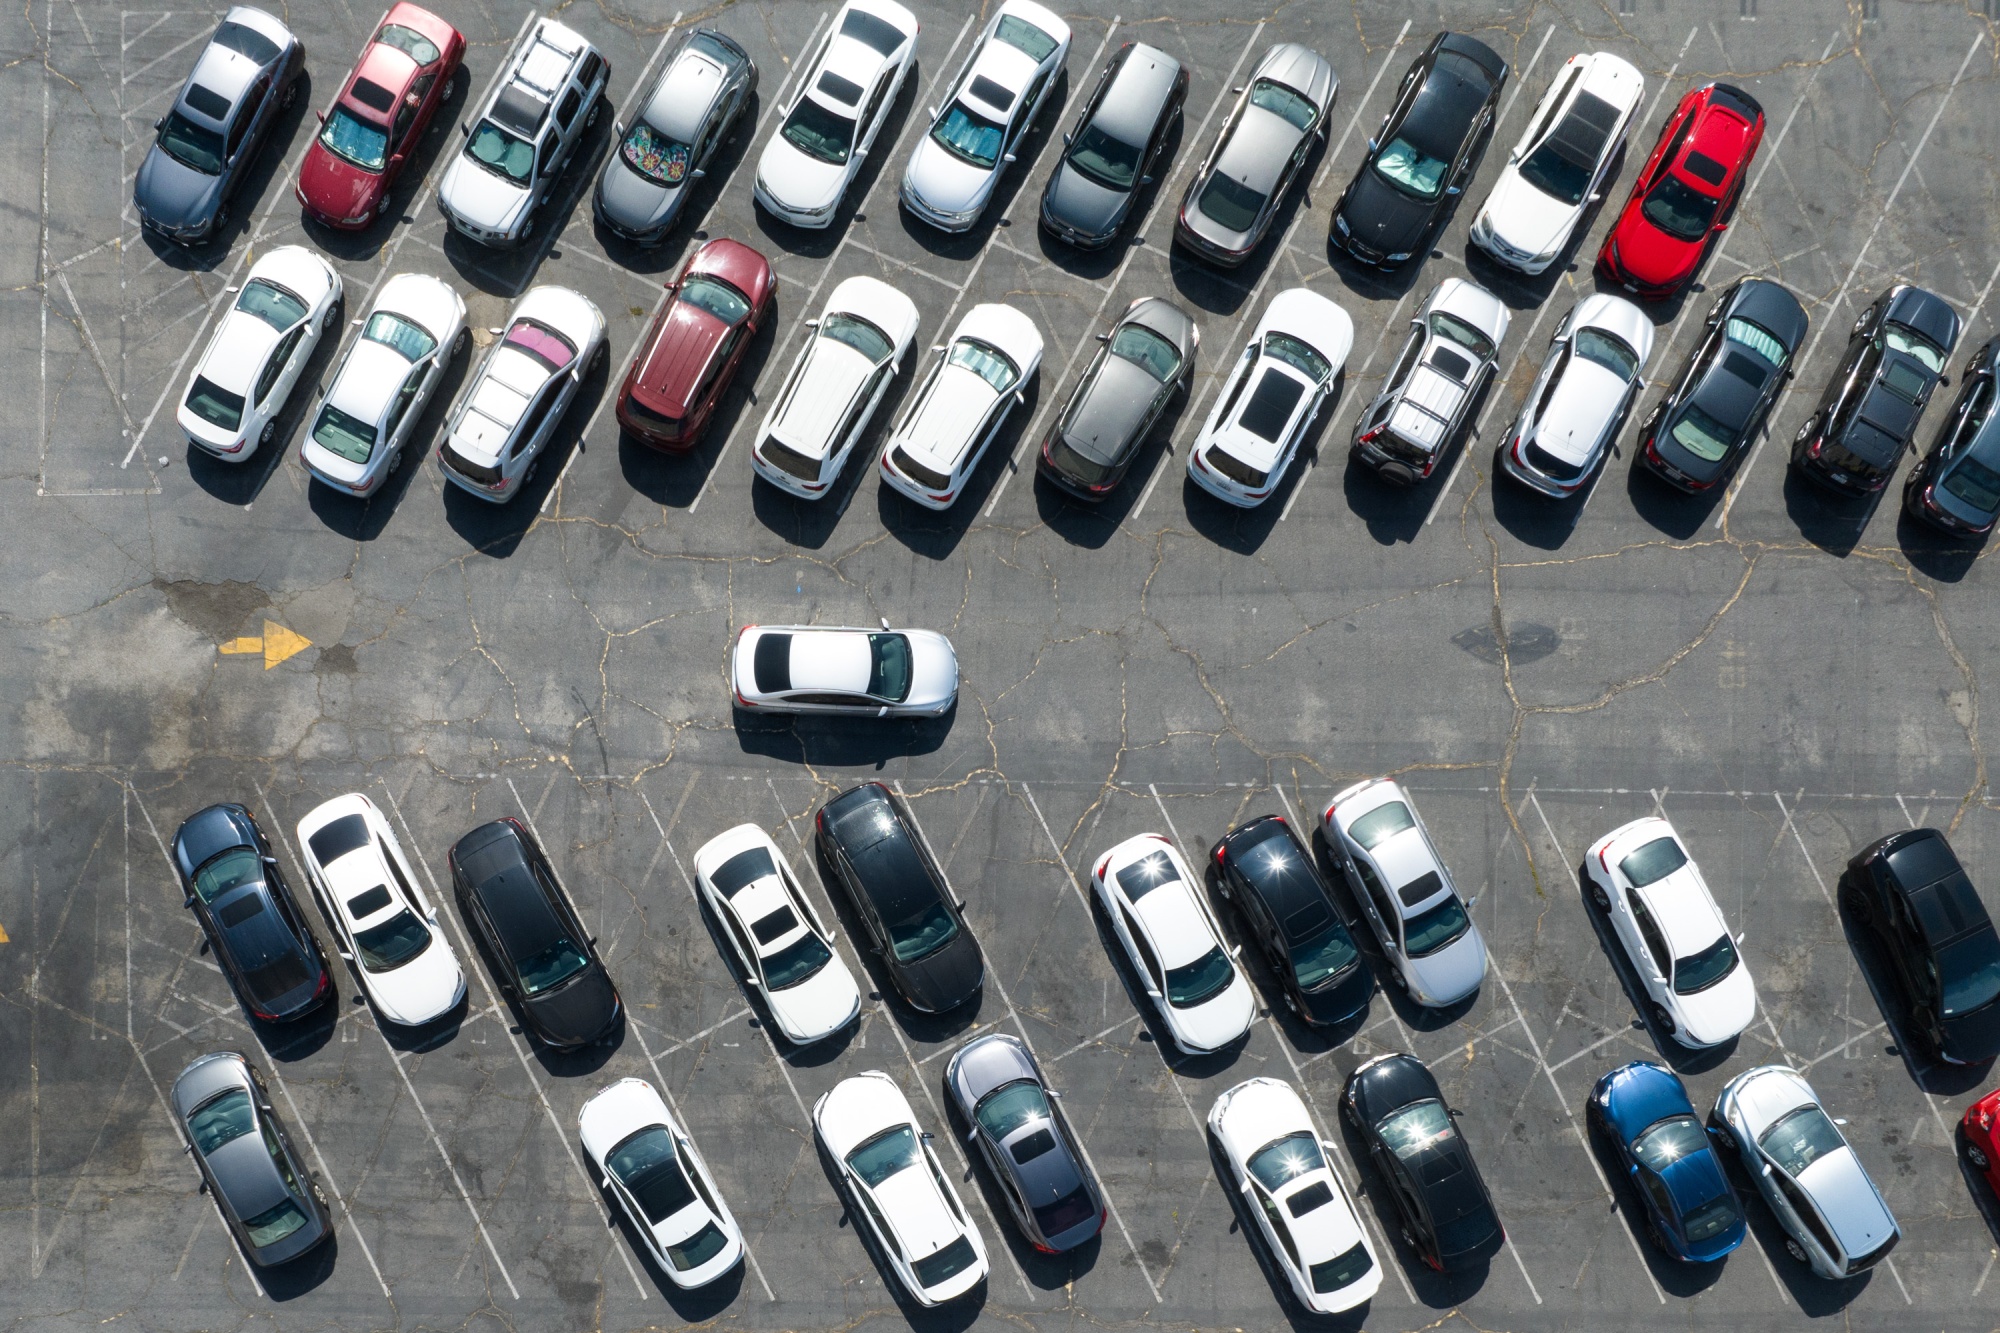 CityLab Daily: California's New Parking Law Is a Win for Housing, Climate -  Bloomberg